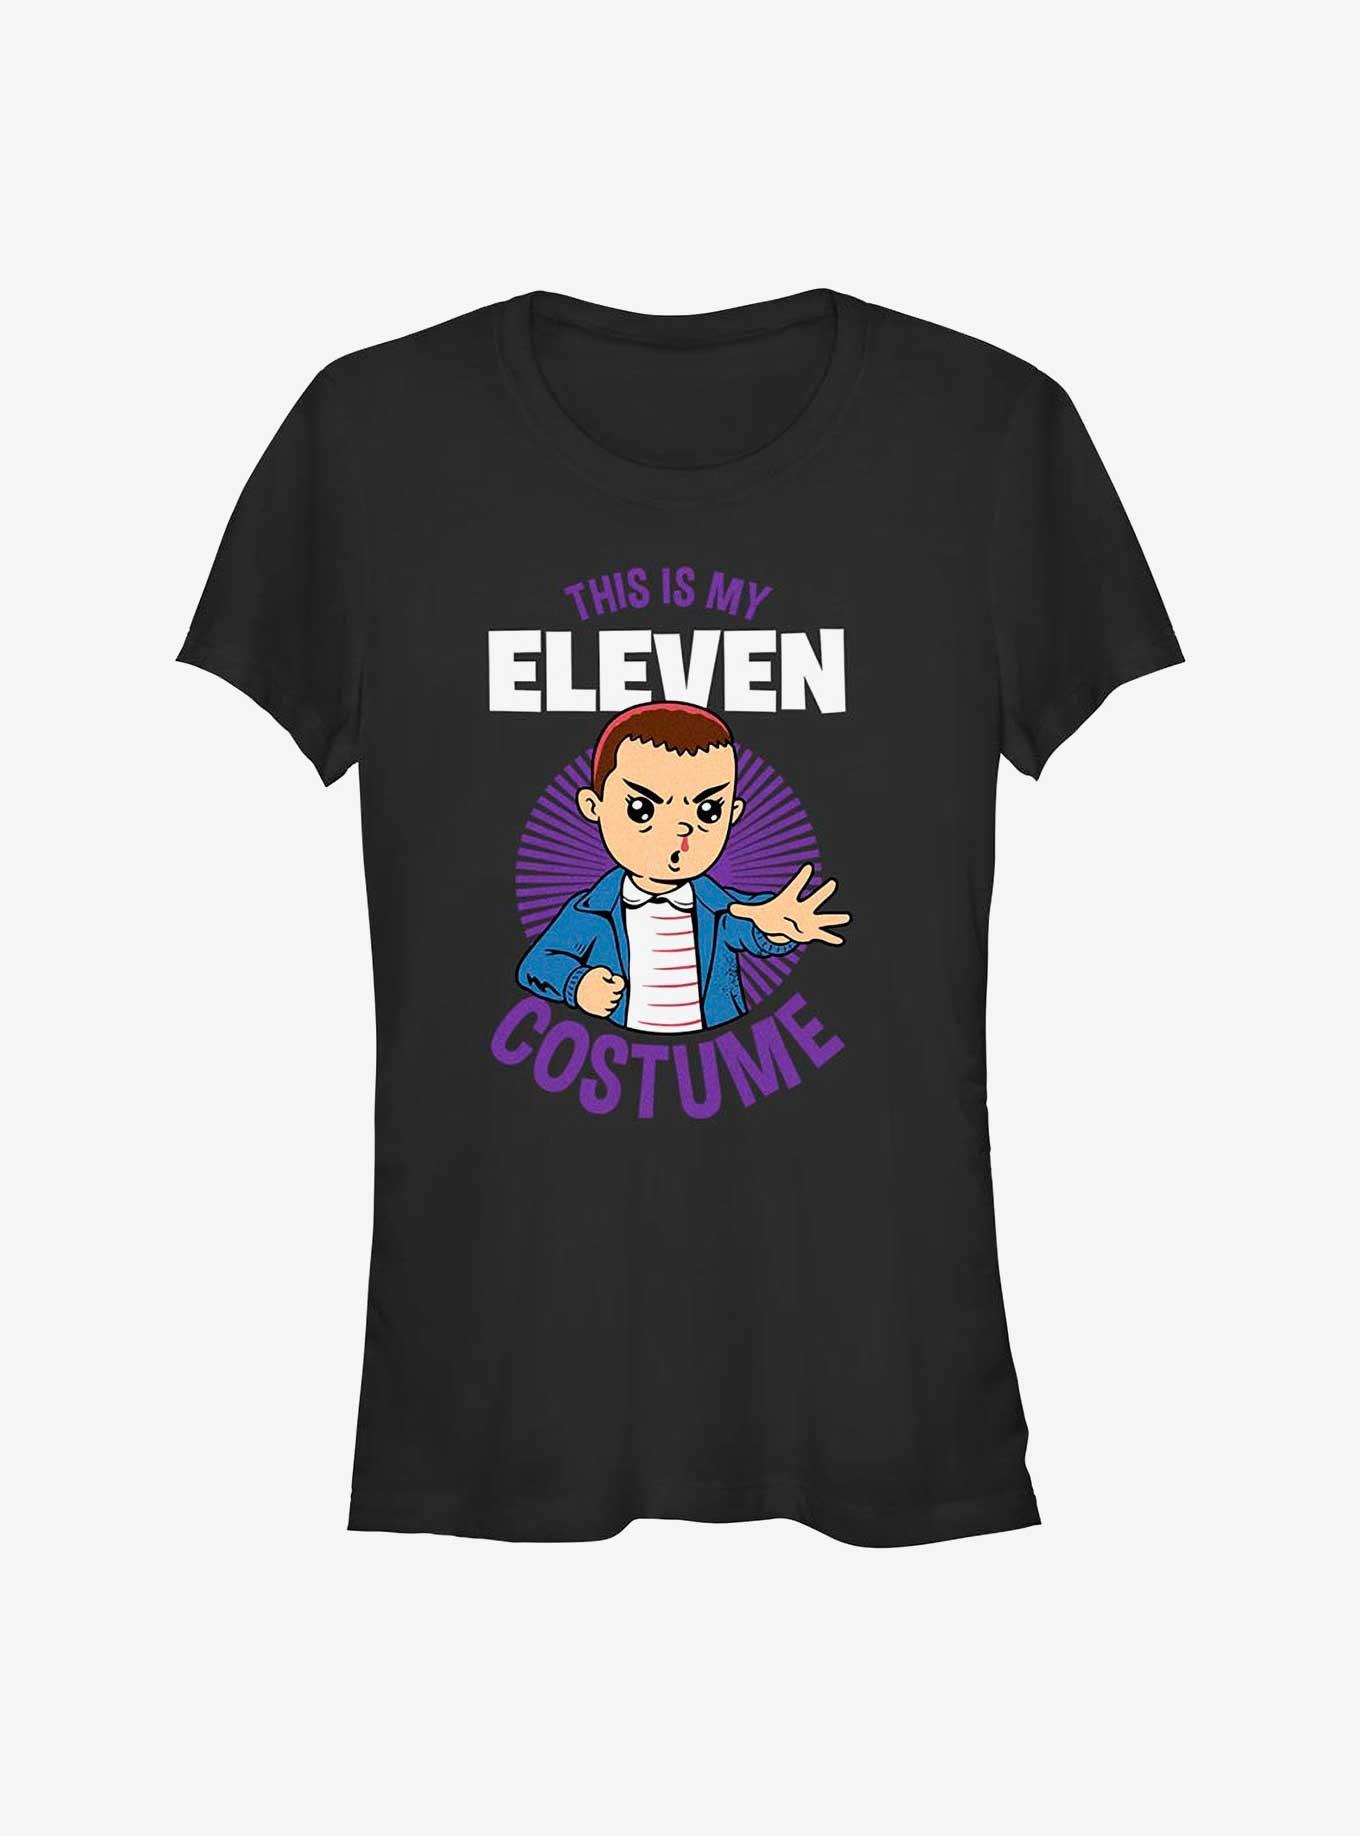 Stranger Things This Is My Eleven Costume Girls T-Shirt